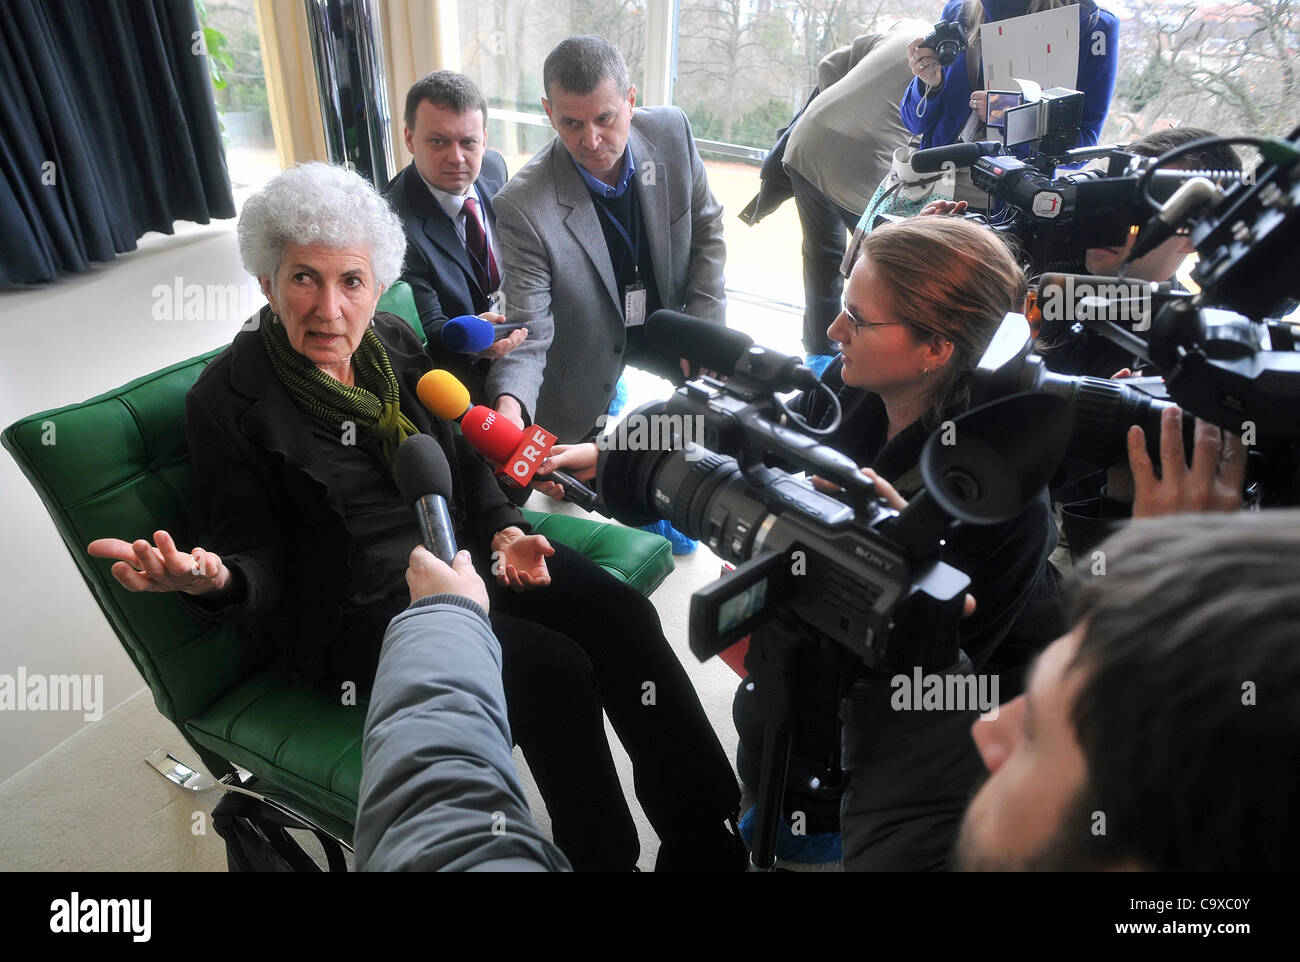 Brno, Czech Republic. Feb 29, 2012.  Ruth Tugendhat speaks to journalists in newly restored Villa Tugendhat in Brno. Designed by Ludwig Mies van der Rohe, the building is regarded as an icon of modernism. Credit: Igor Sefr/CTK/Alamy Live News Stock Photo